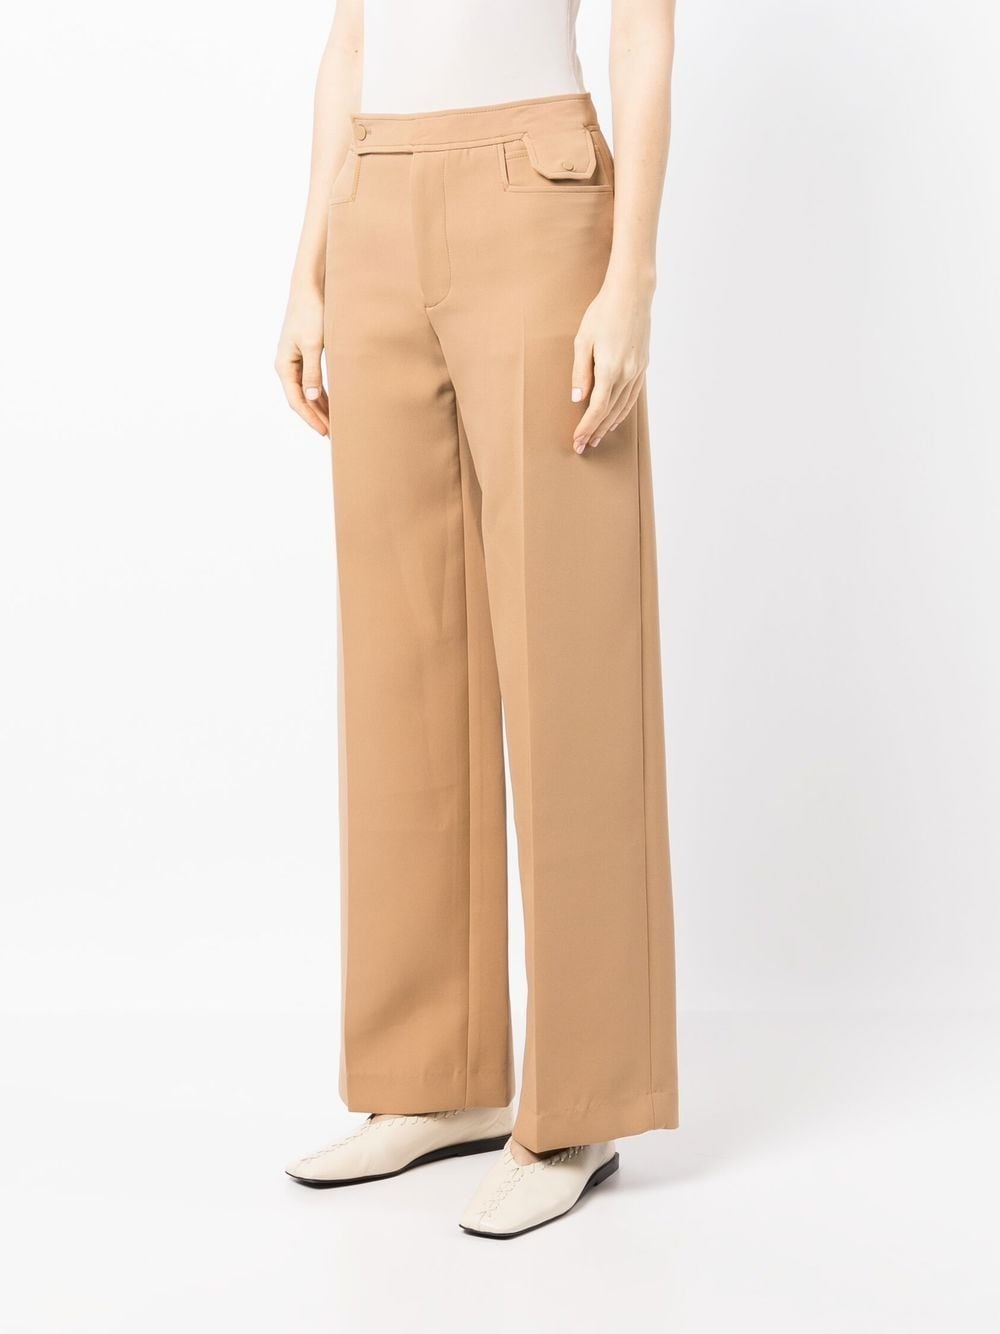 pressed-crease straight trousers - 3